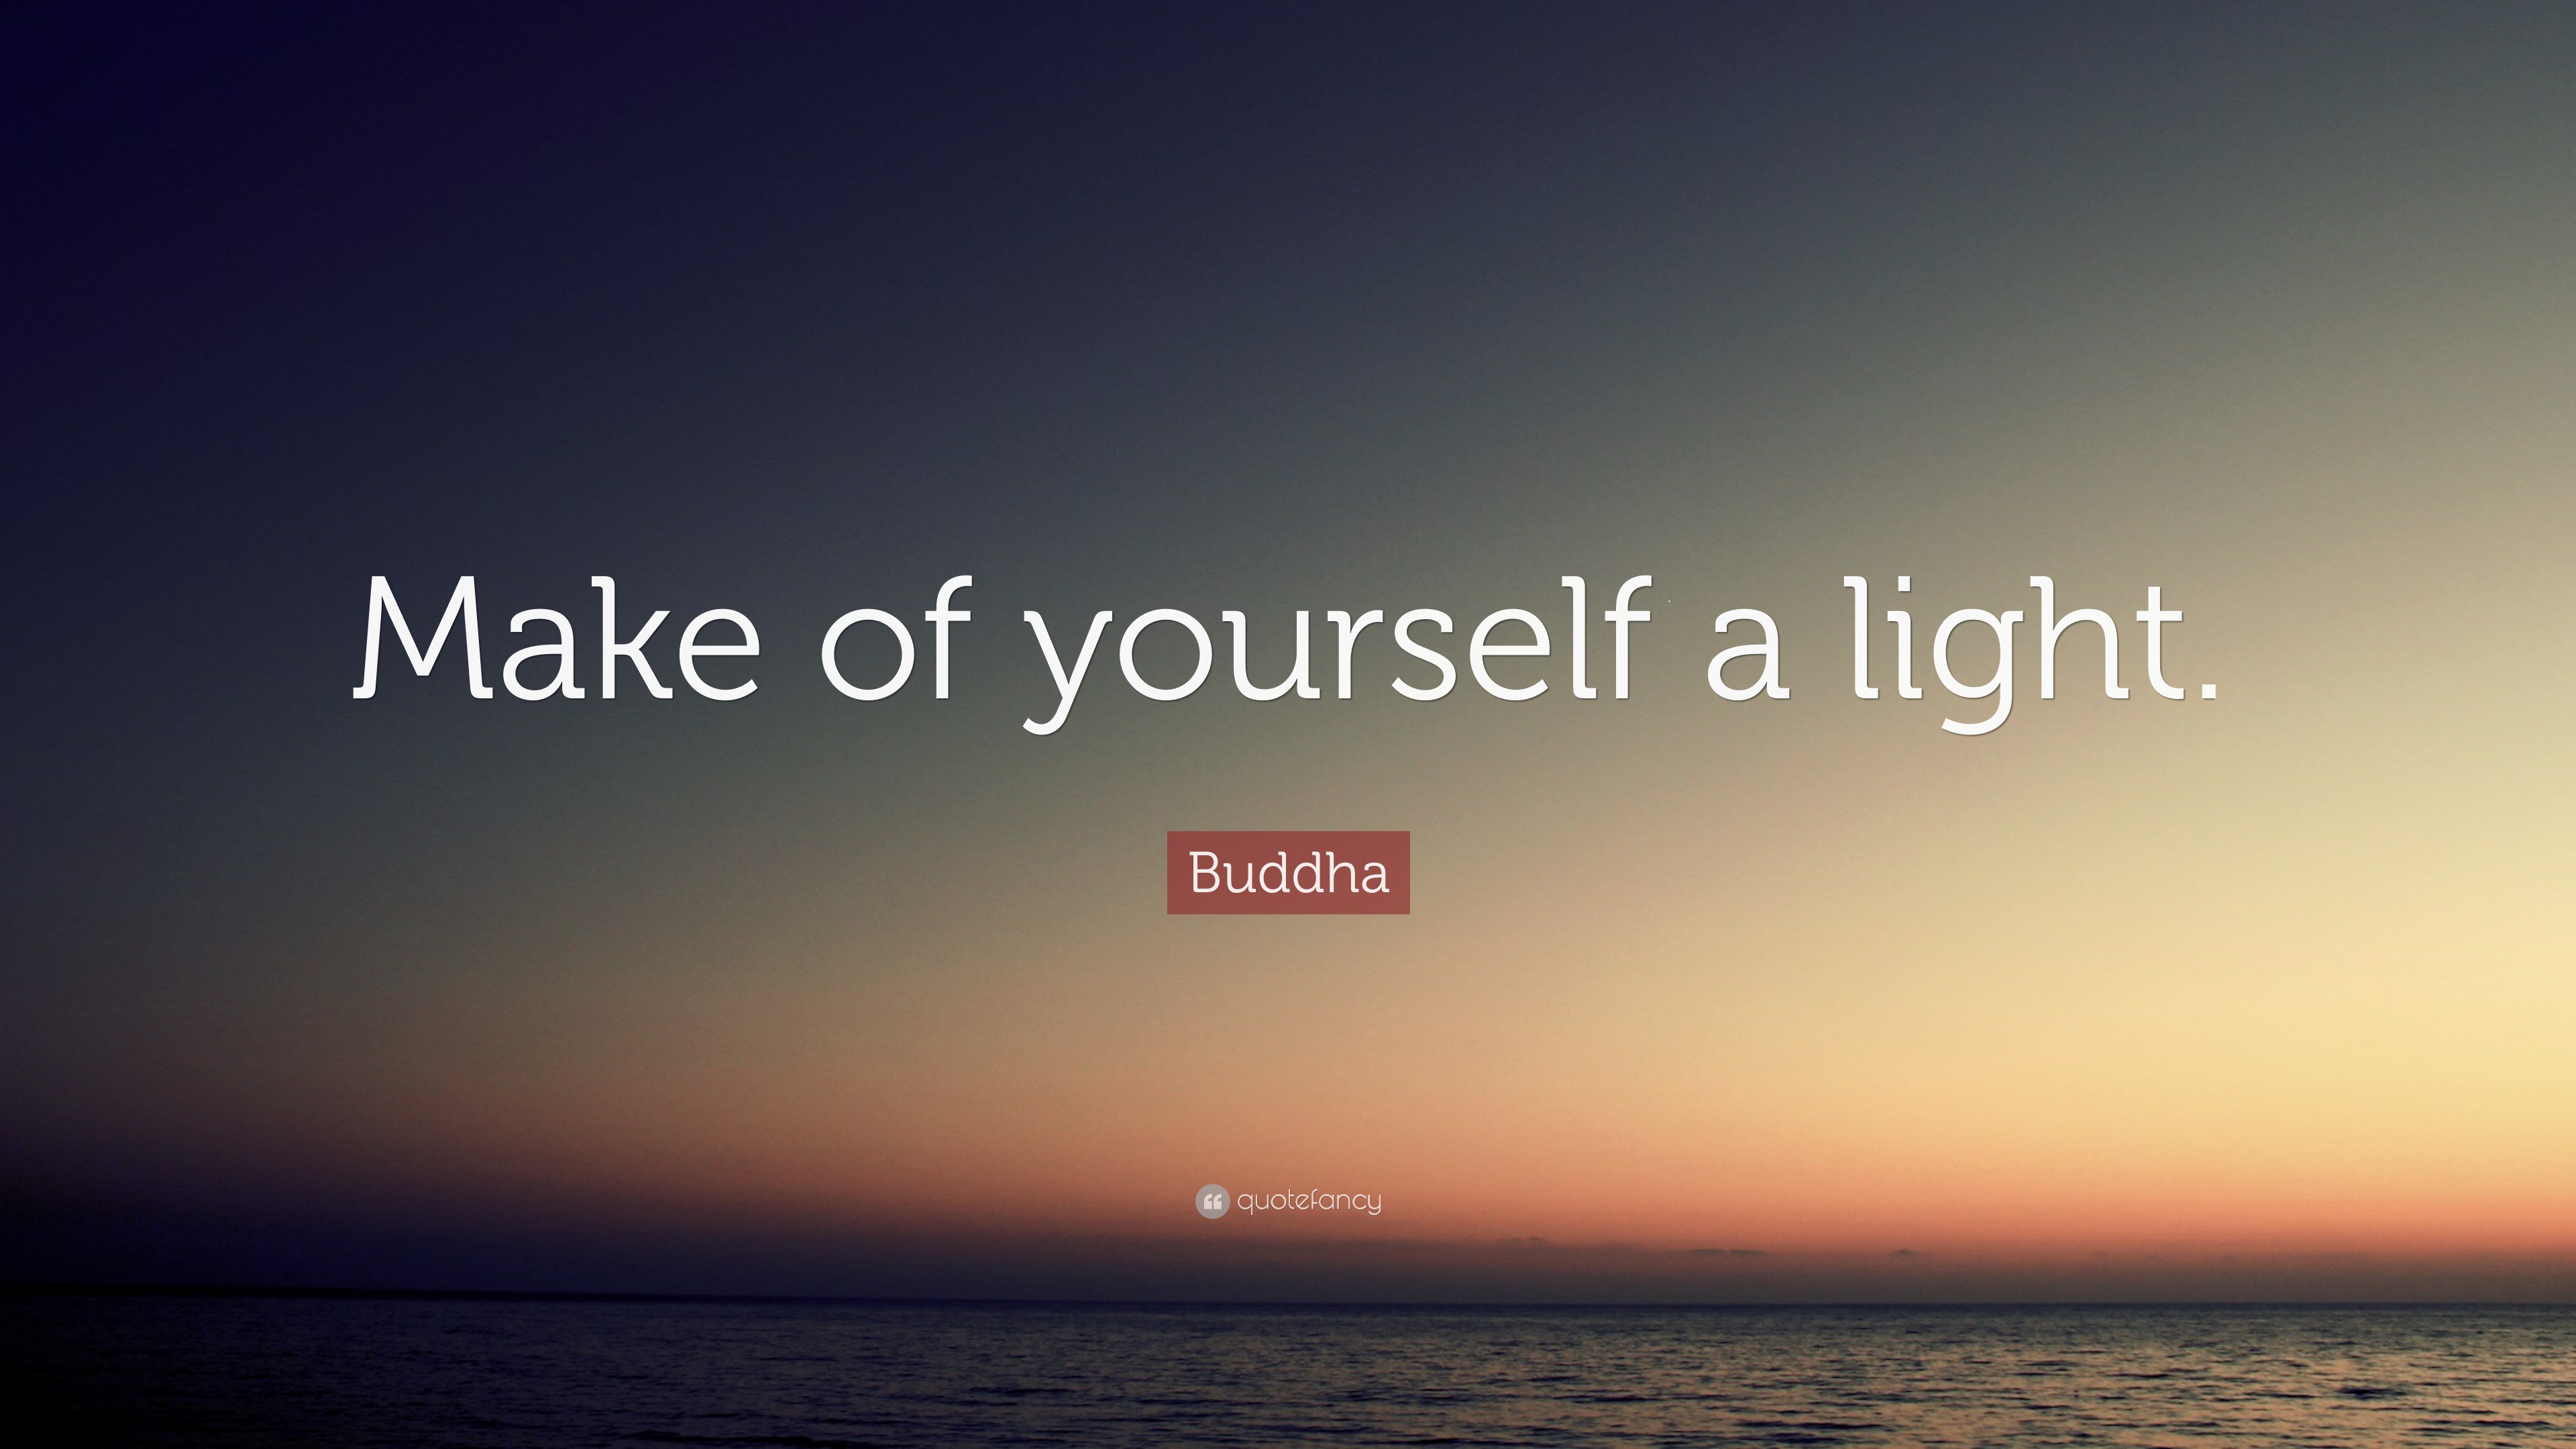 Make of yourself a light.